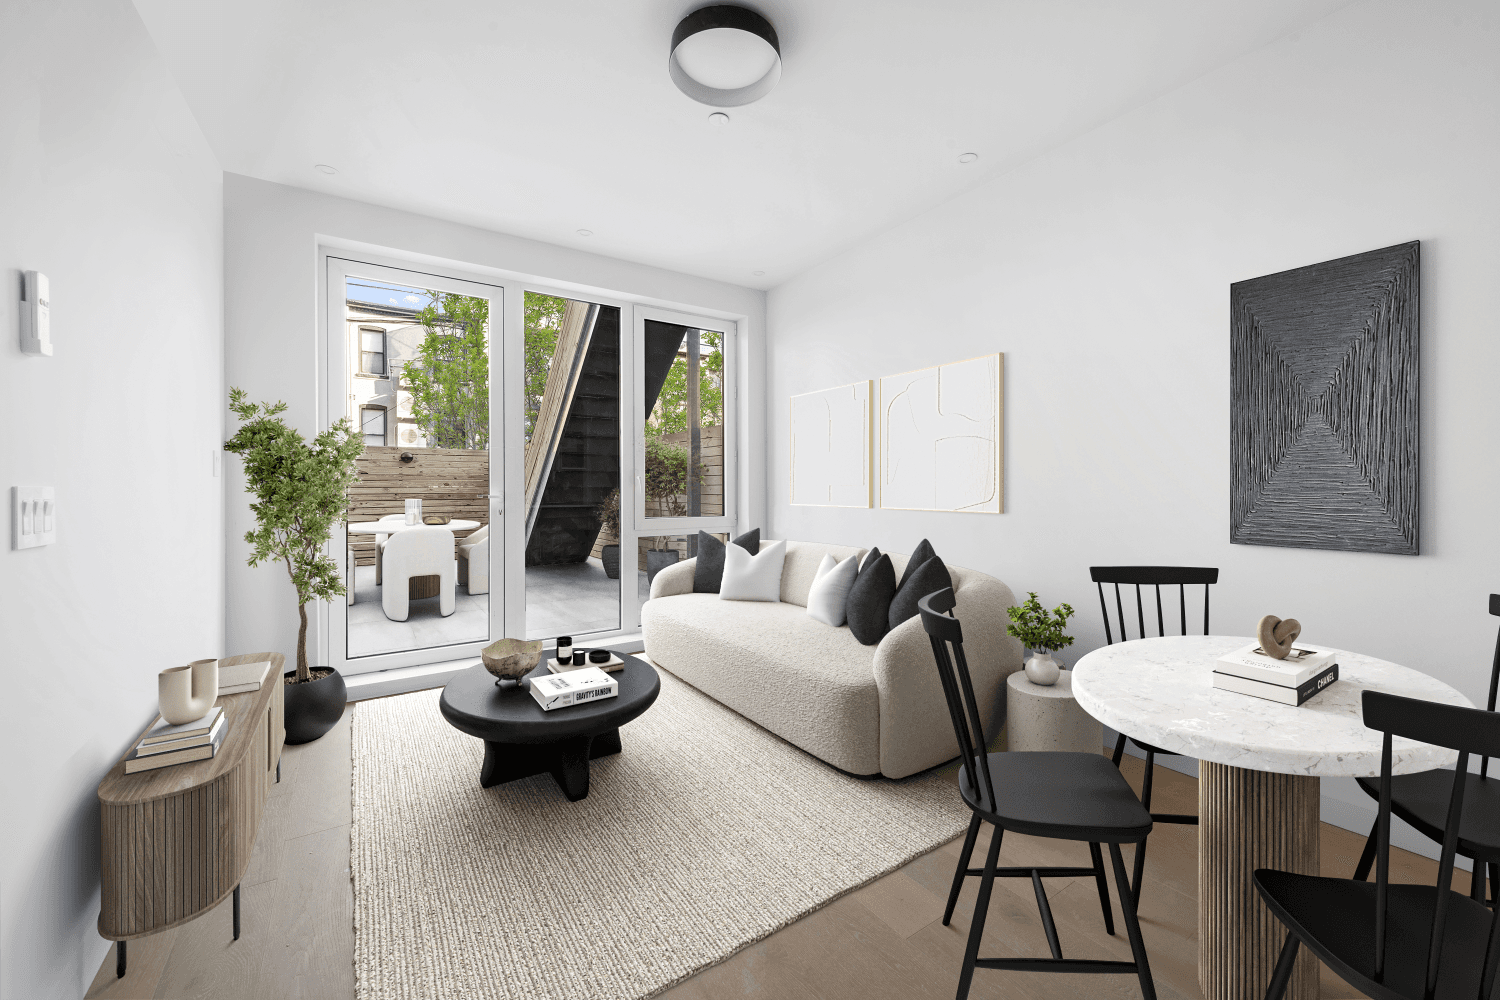 Welcome to 637 Madison, a stunning new development of 8 boutique condominiums in Stuyvesant Heights, Brooklyn.